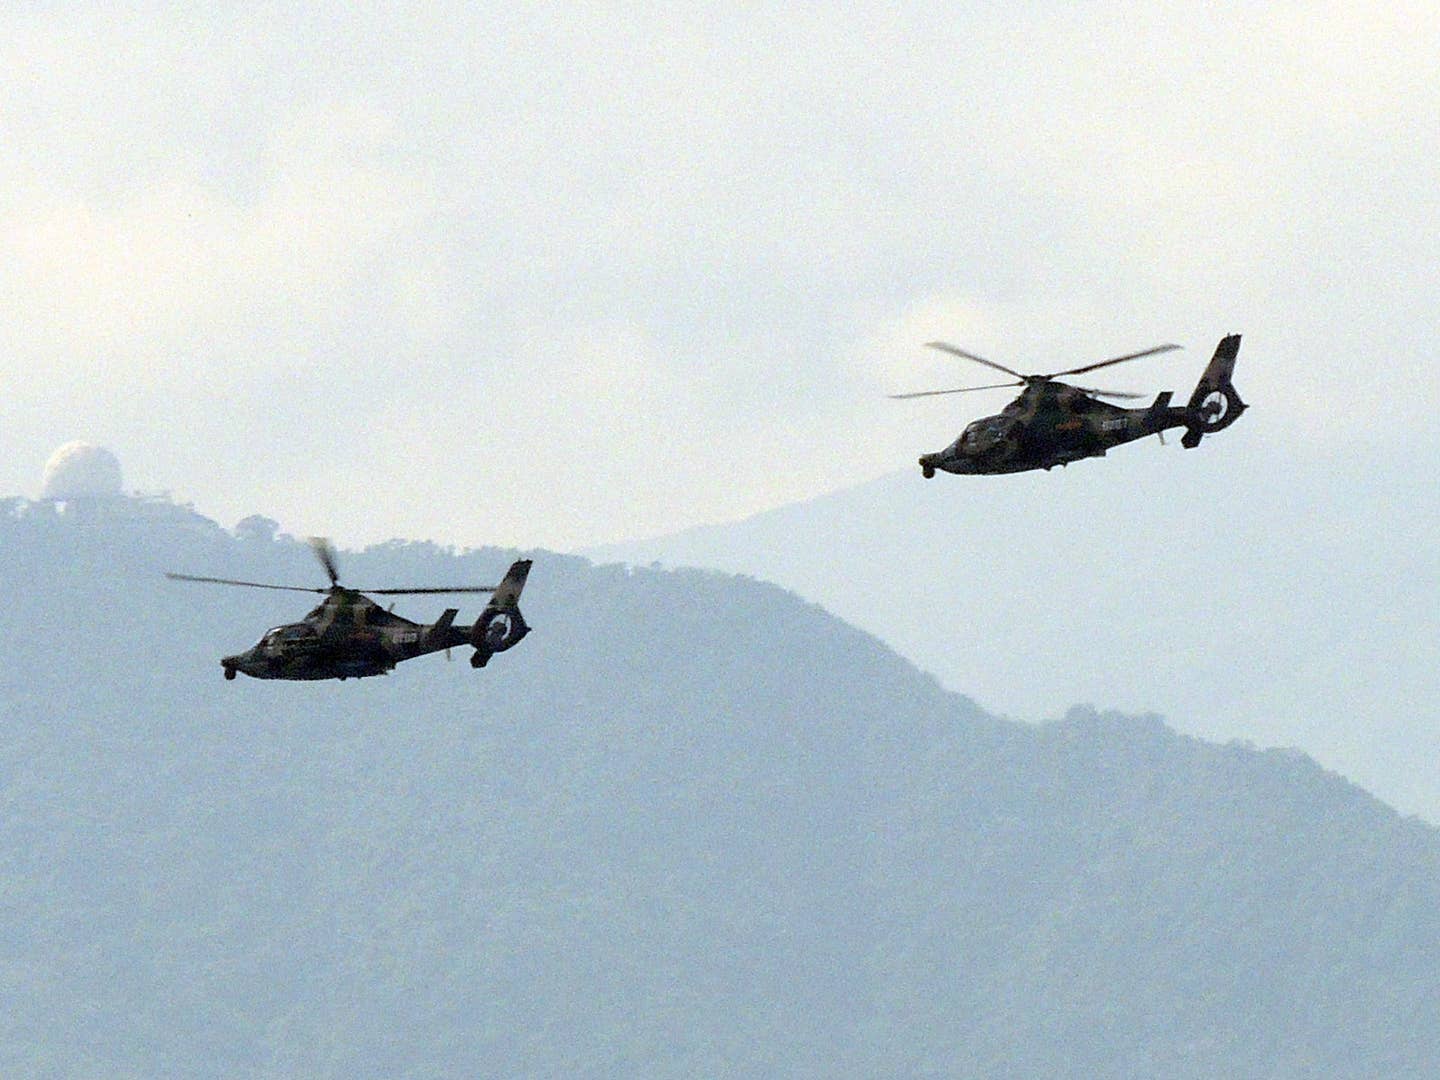 Two Harbin Z-9Ws. The Chinese Communists used this as the basis for the Z-19. (Wikimedia Commons photo by Tksteven)